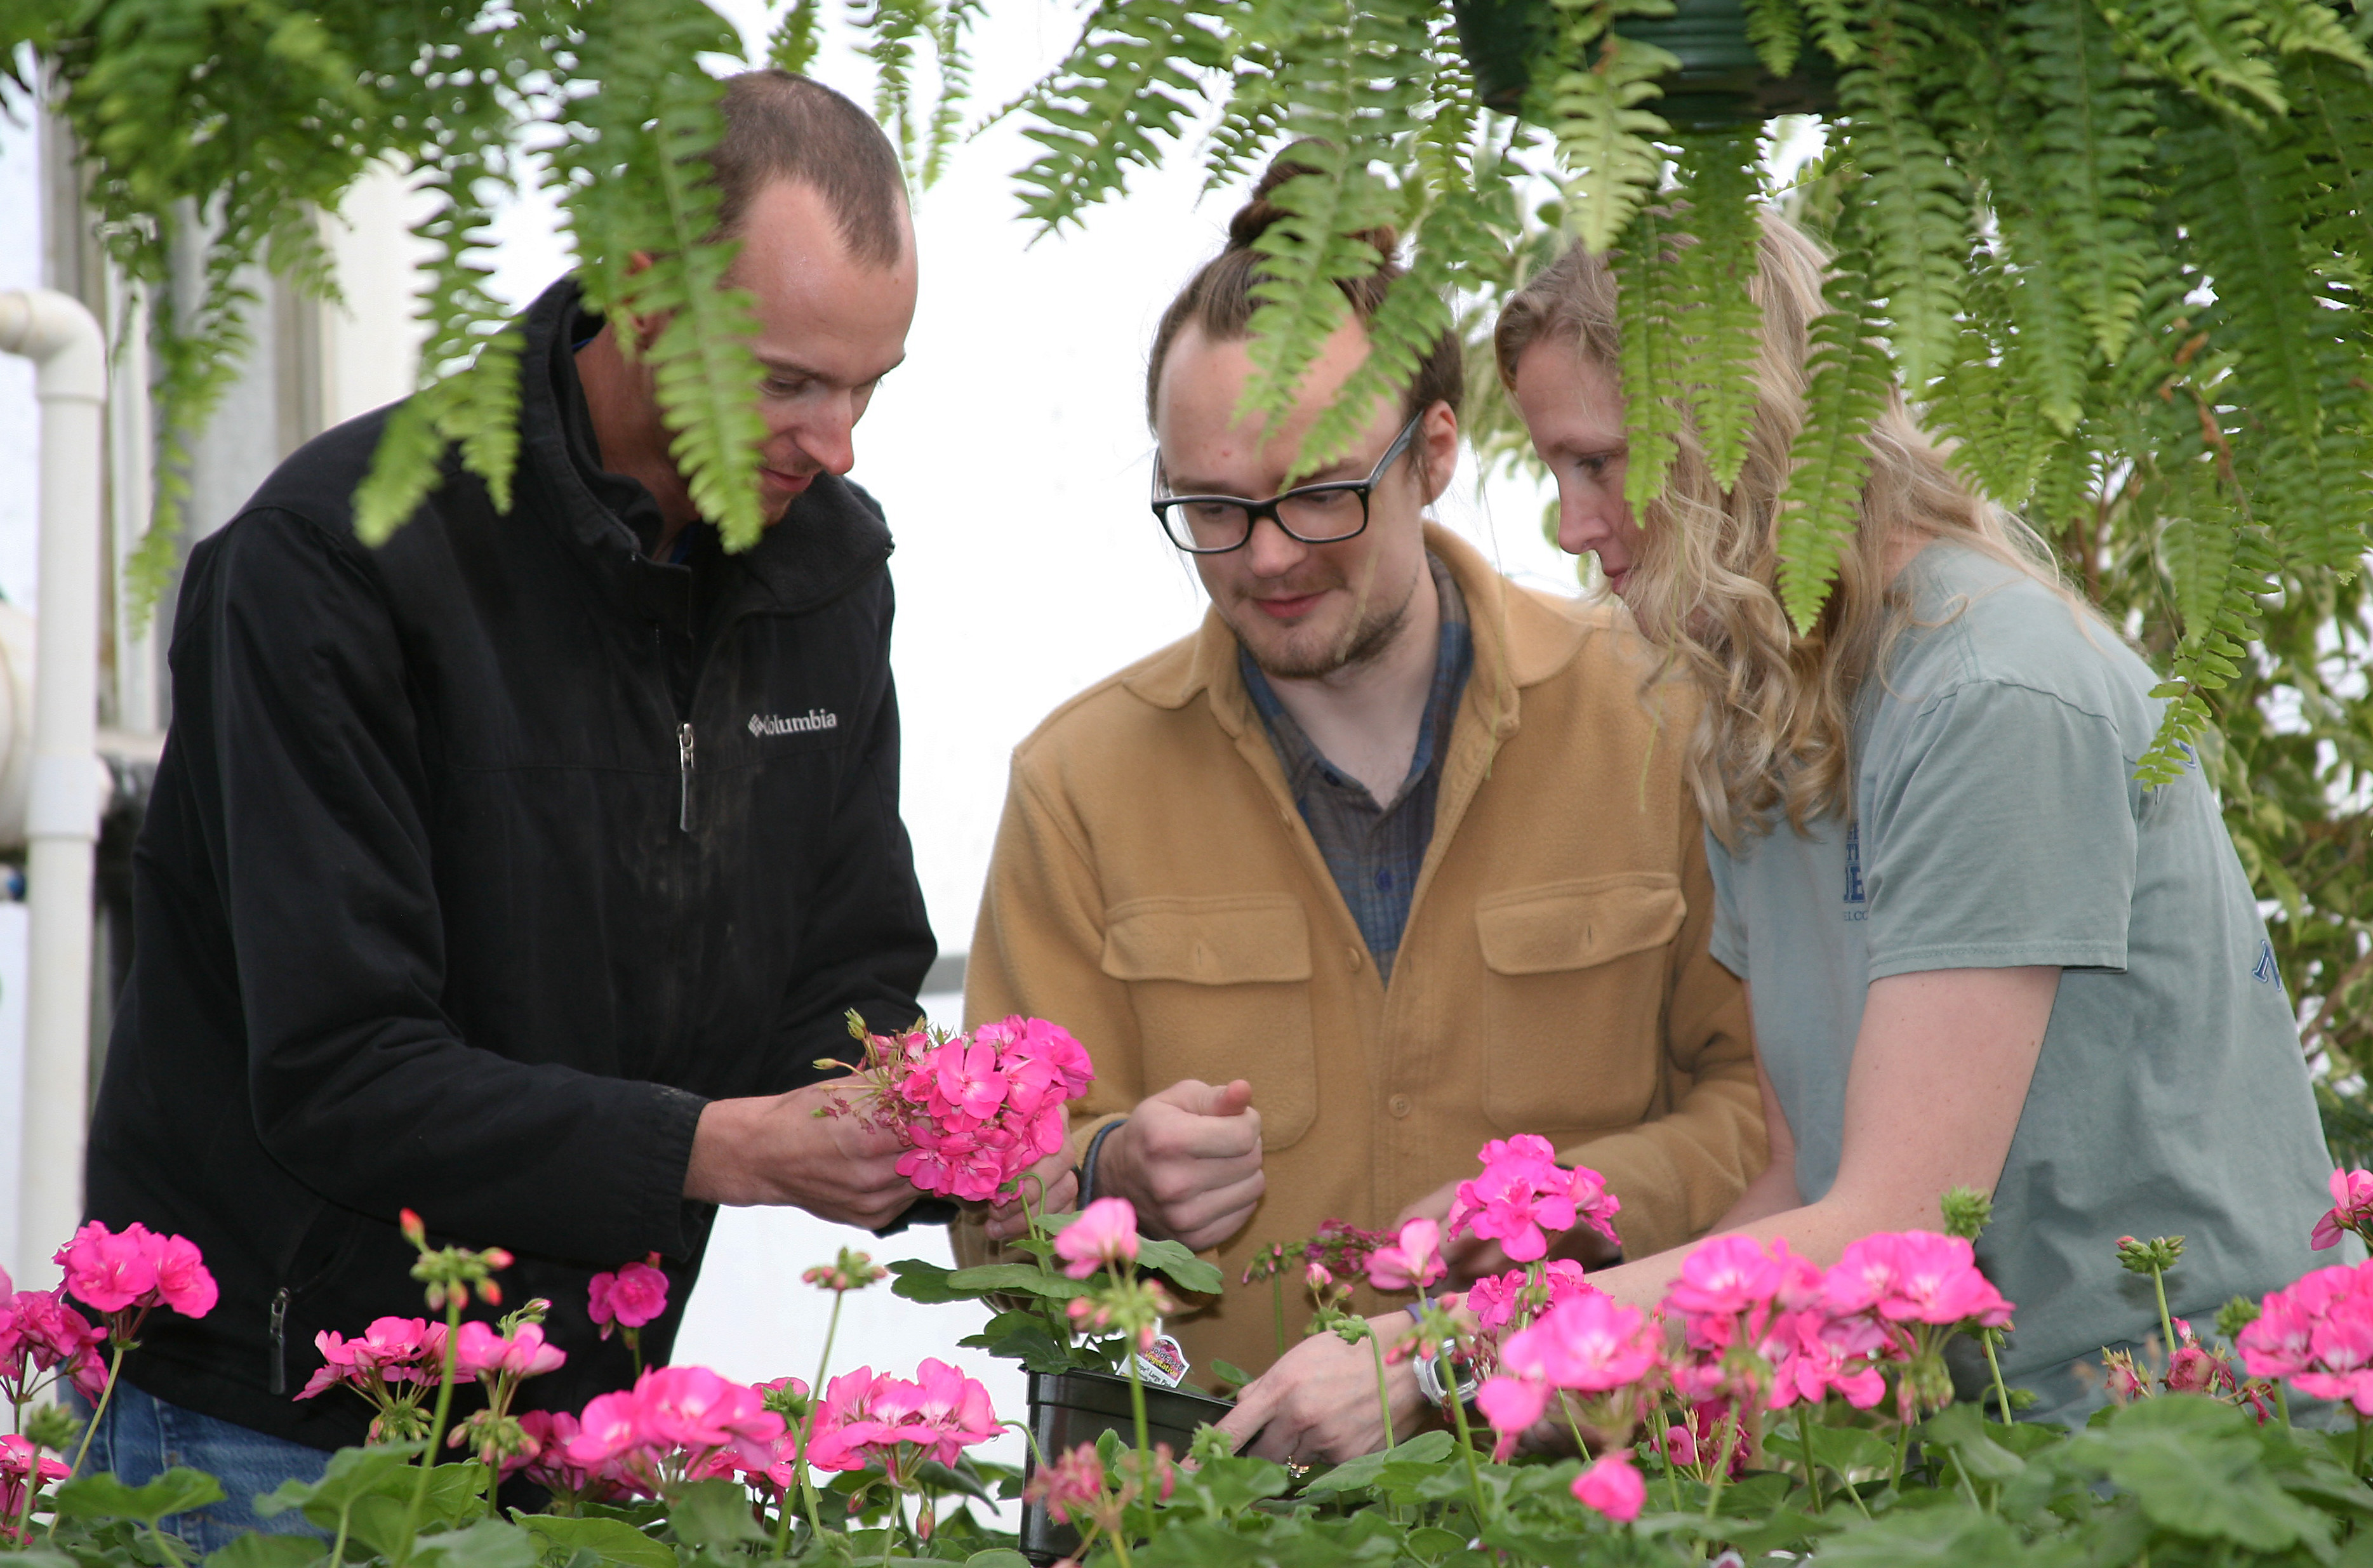 Chase Bohannon (left) of Calhoun, Jeffrey King (center) of Rome, and Jessica Wakefield (right) of Rome prepare for GNTC’s Spring Plant Sale.